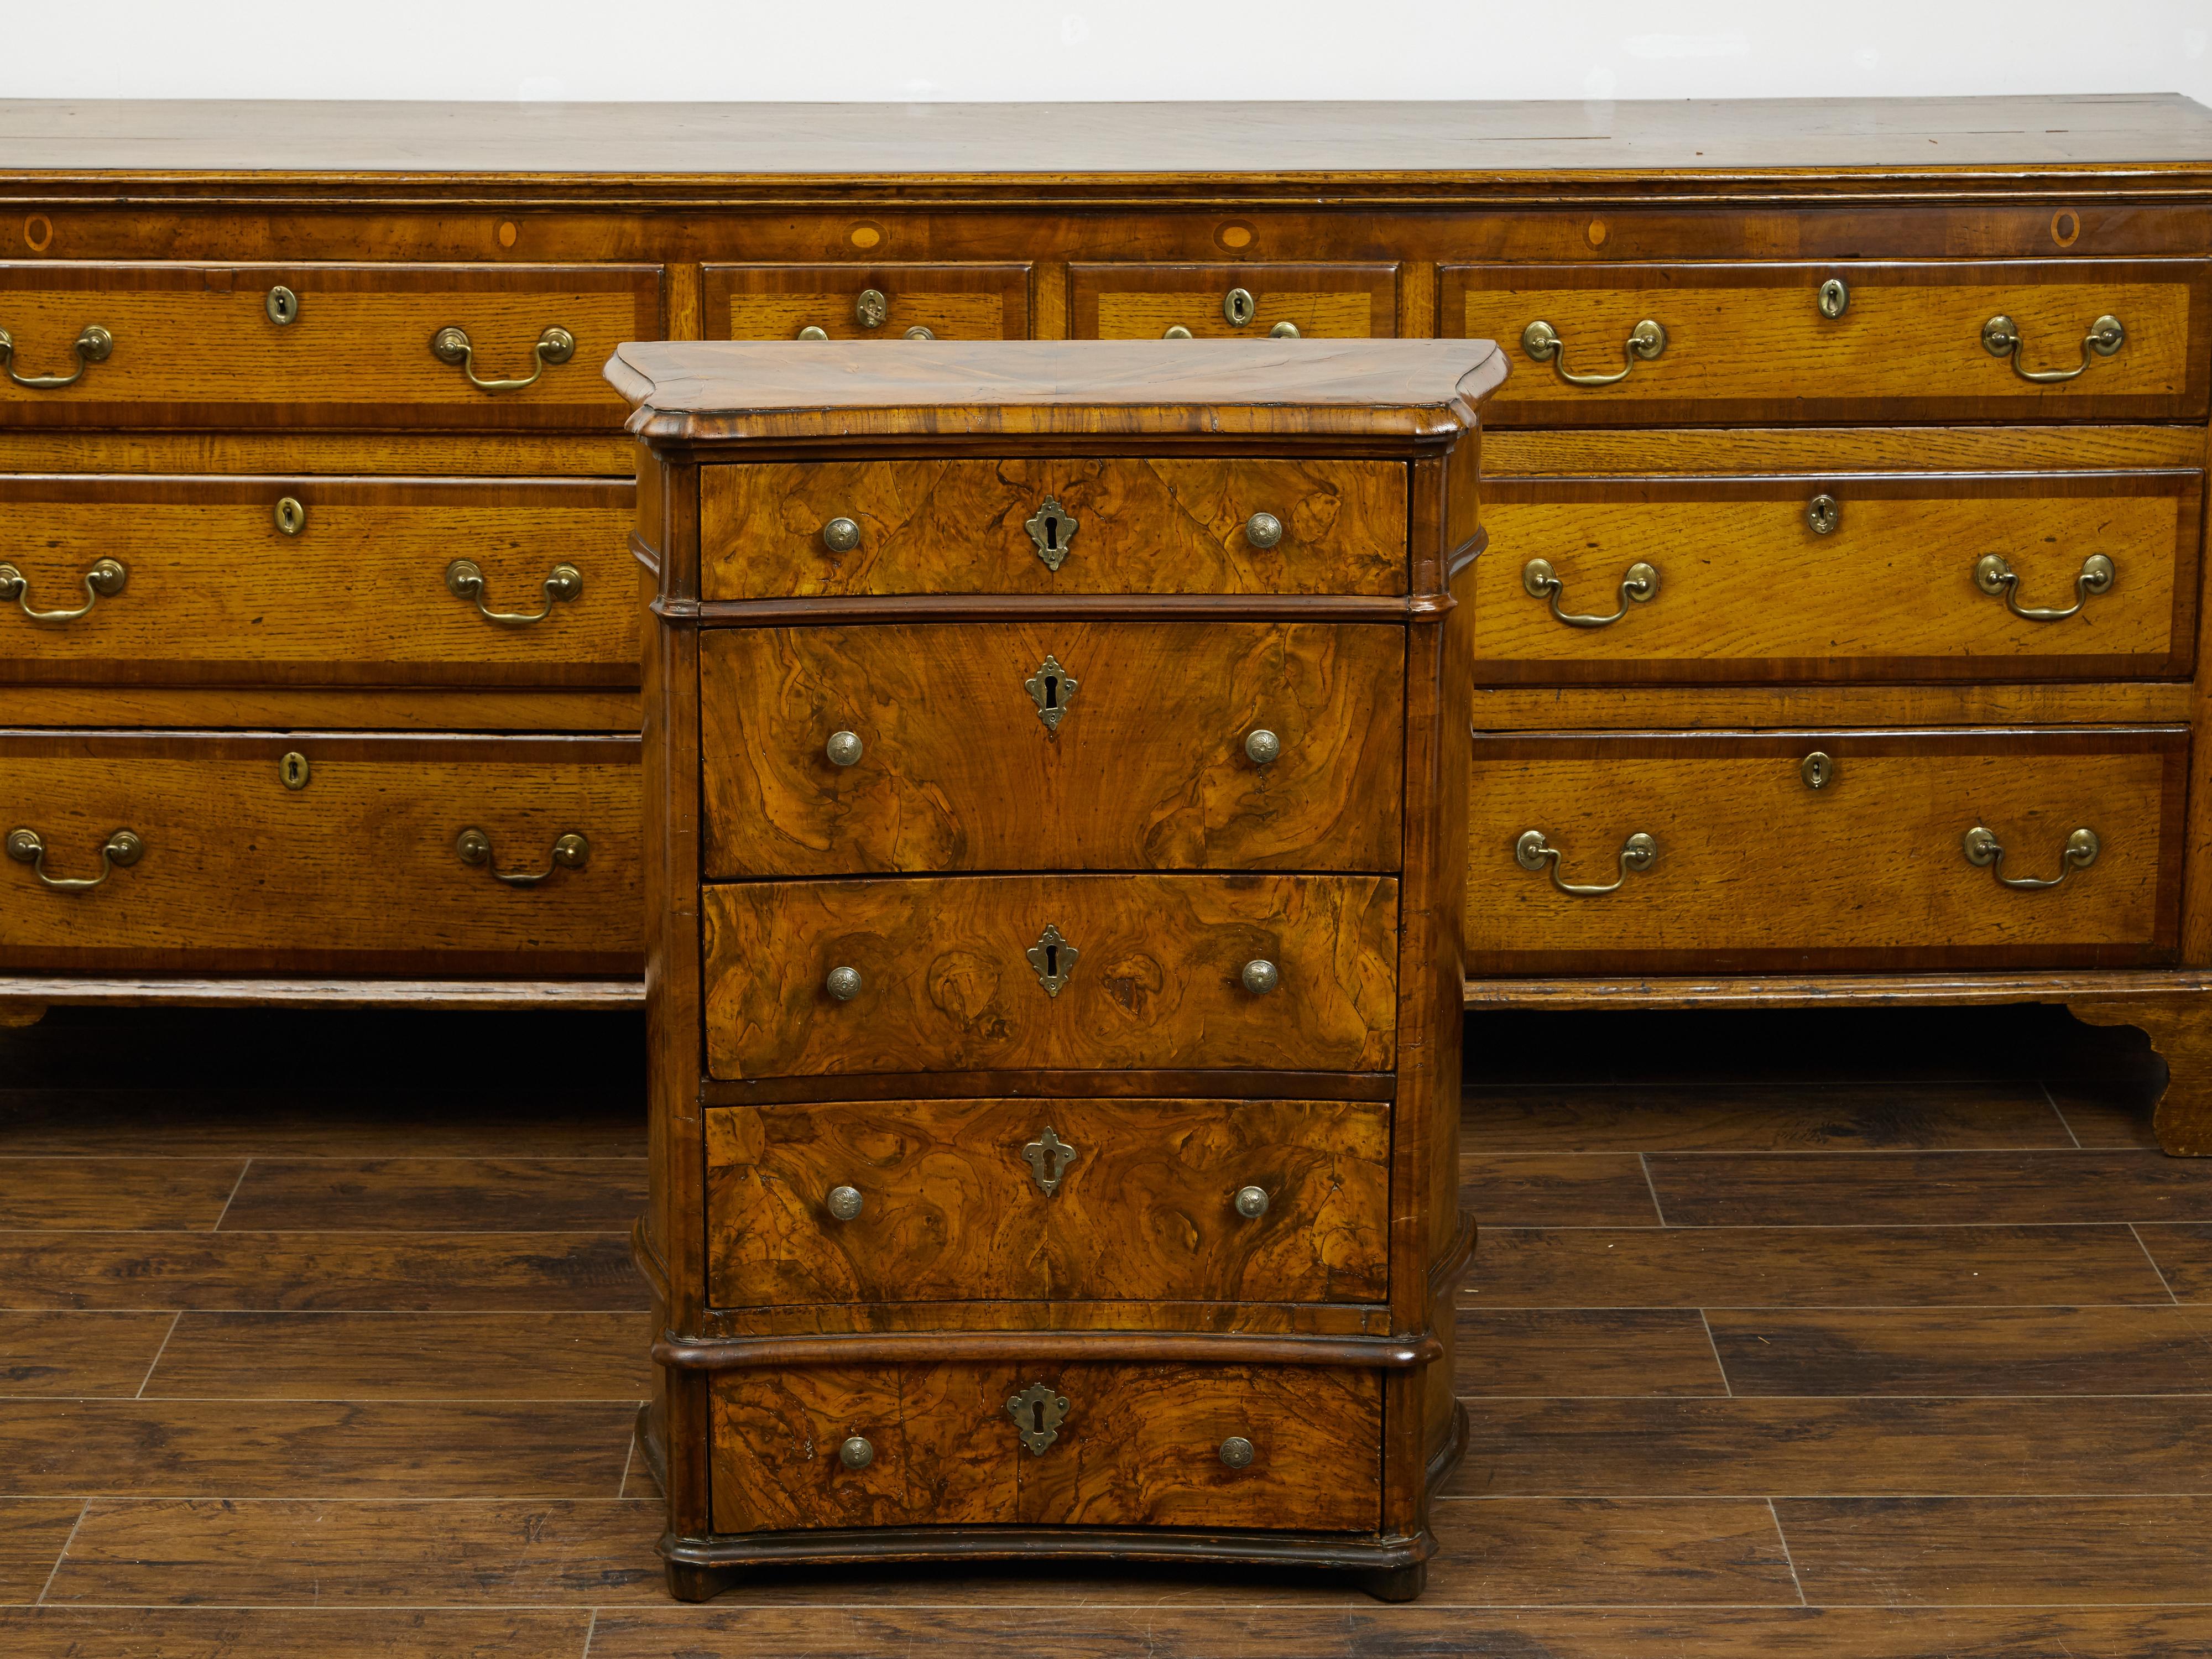 An Italian petite walnut commode from the early 19th century, with butterfly veneer and five drawers. Created in Italy during the first quarter of the 19th century, this petite commode features a rectangular top with serpentine sides, adorned with a